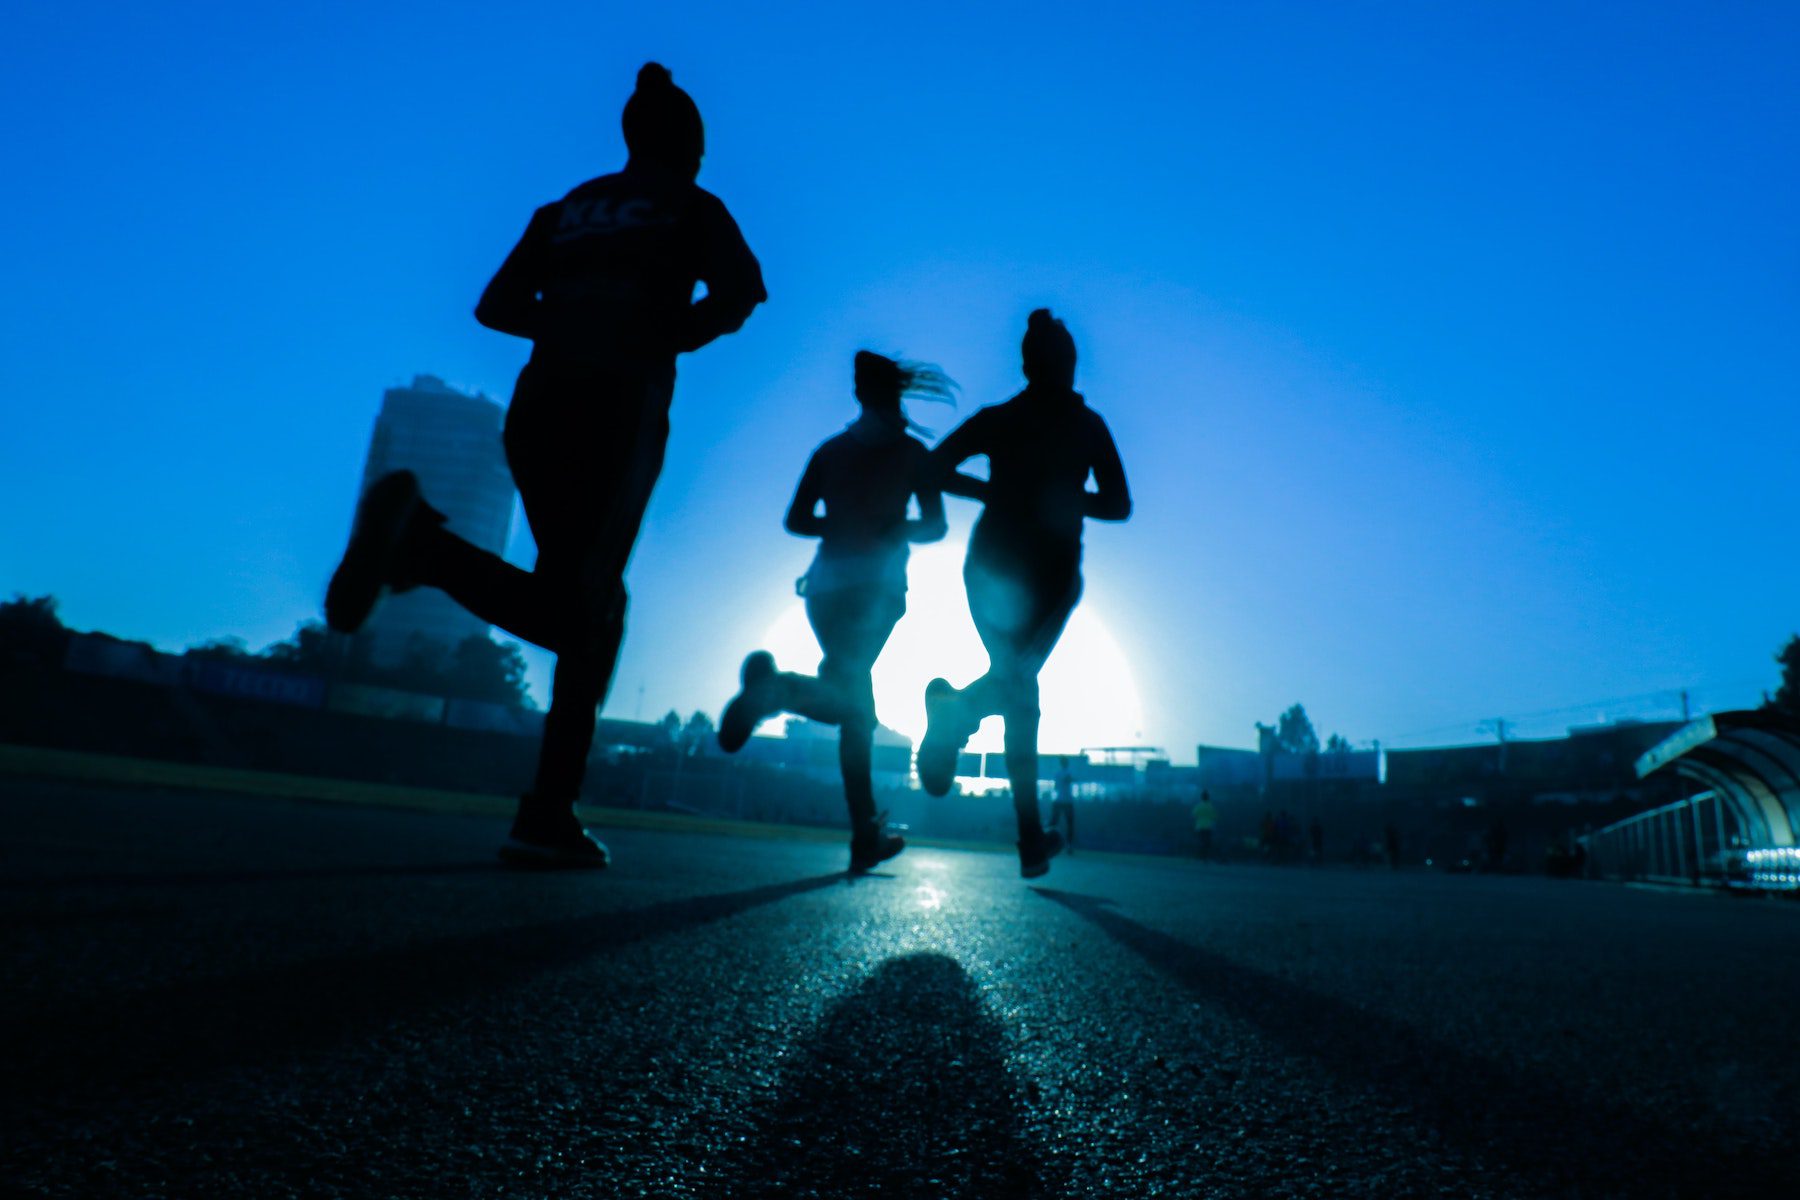 Three women jogging in late evening, silhouettes against blue sky.